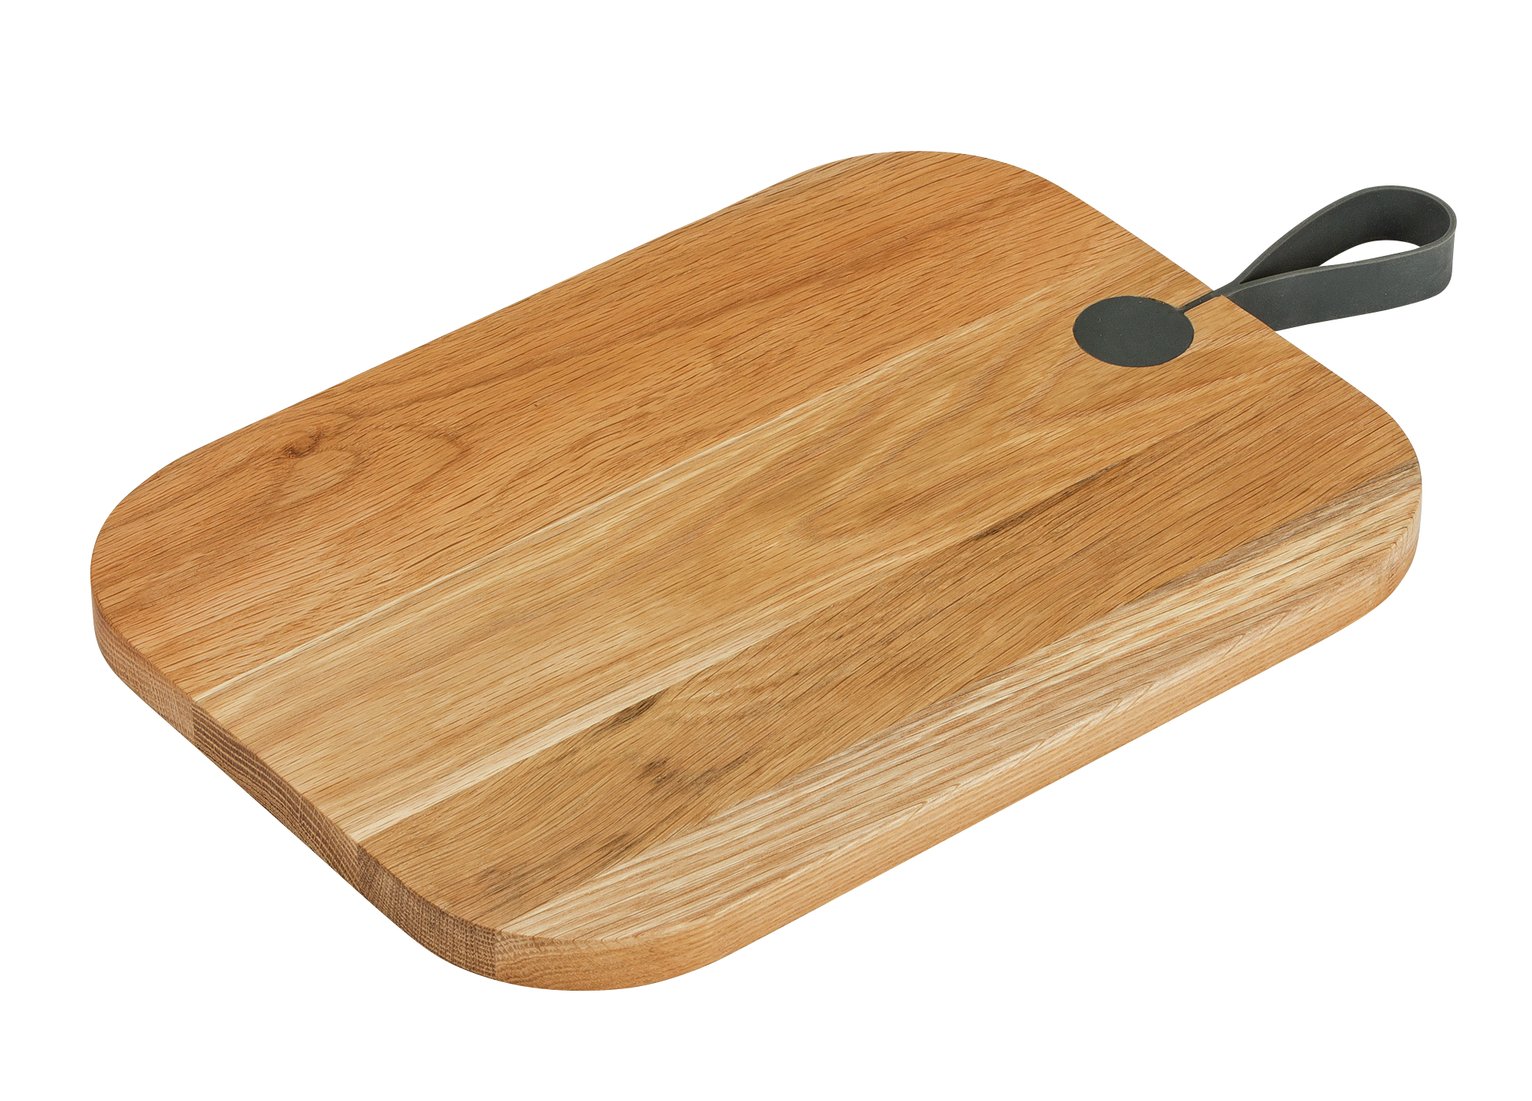 Sainsbury's Home Oak Chopping Board with Silicone Strap review